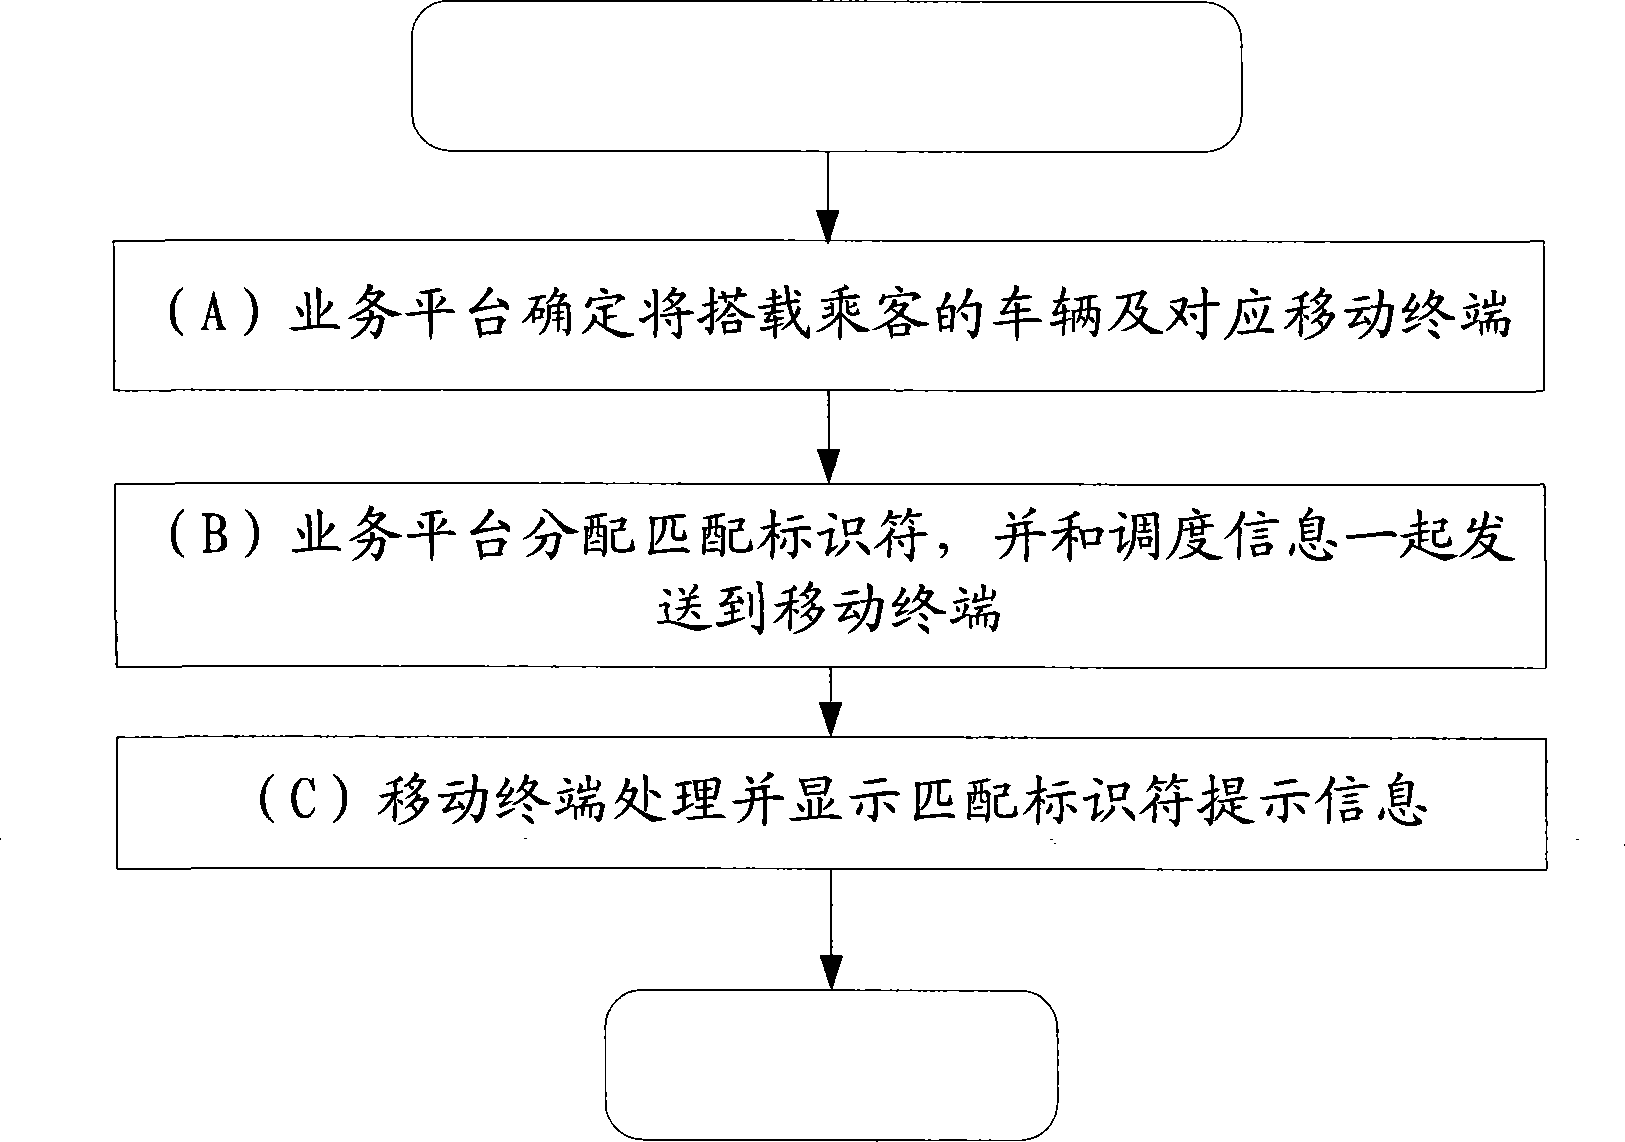 Vehicle matching scheduling system and method